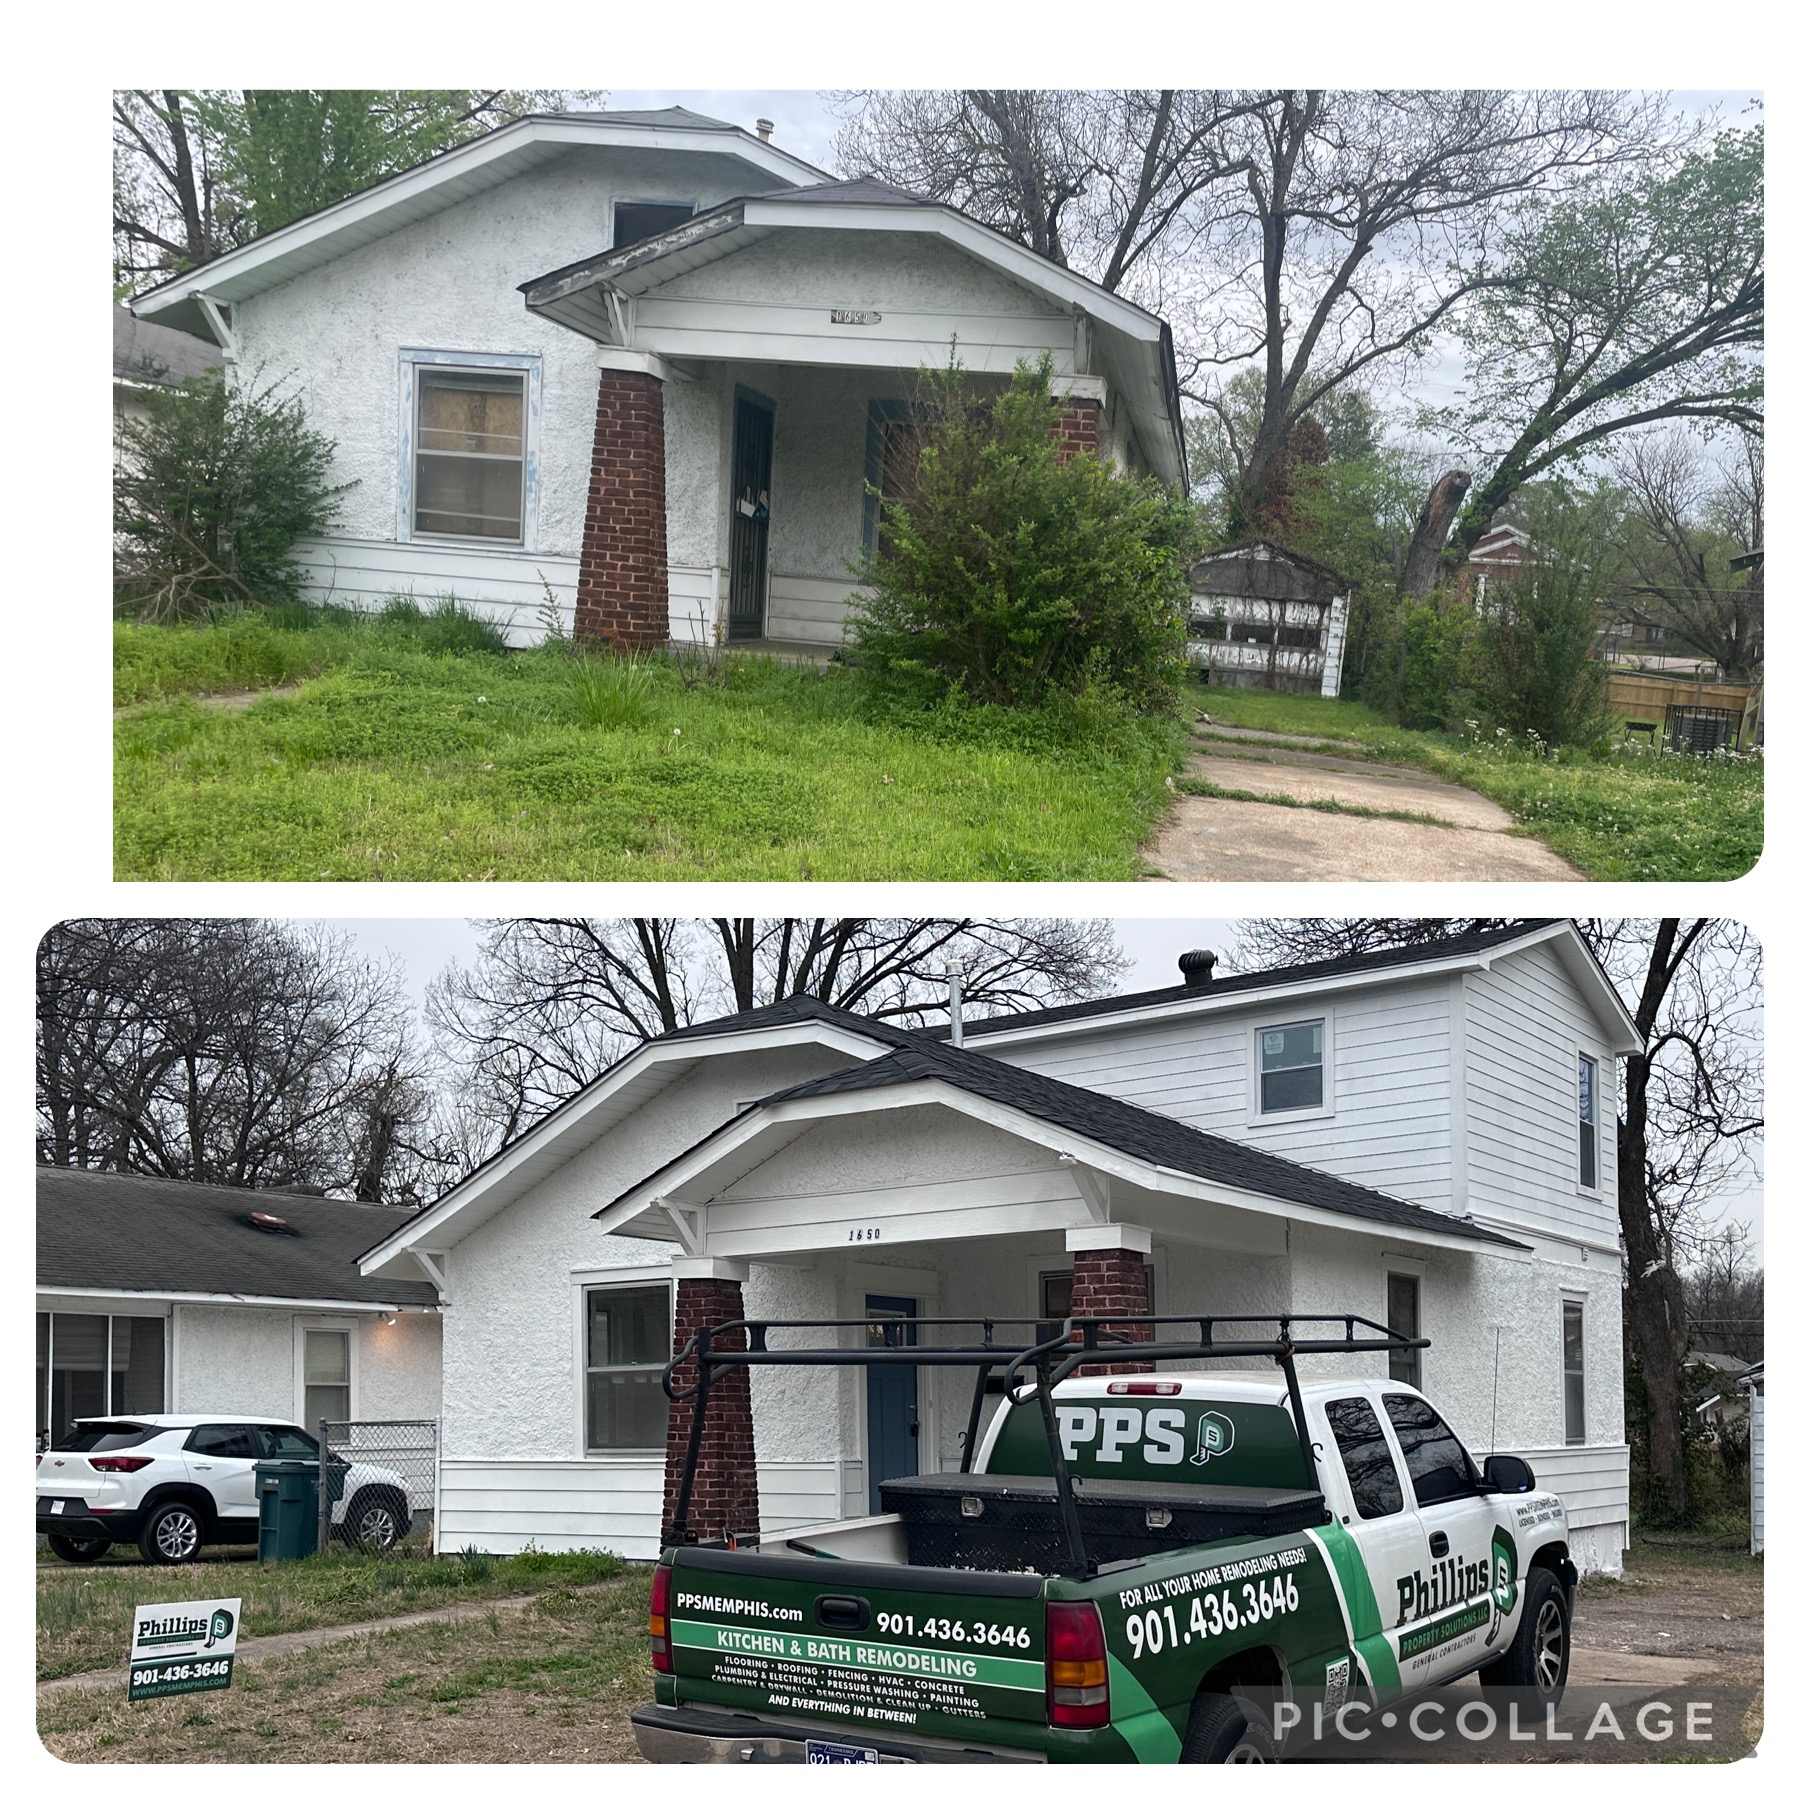 Turnkey Remodel with addition of 2 bedrooms in Historical Neighborhood in Memphis, TN